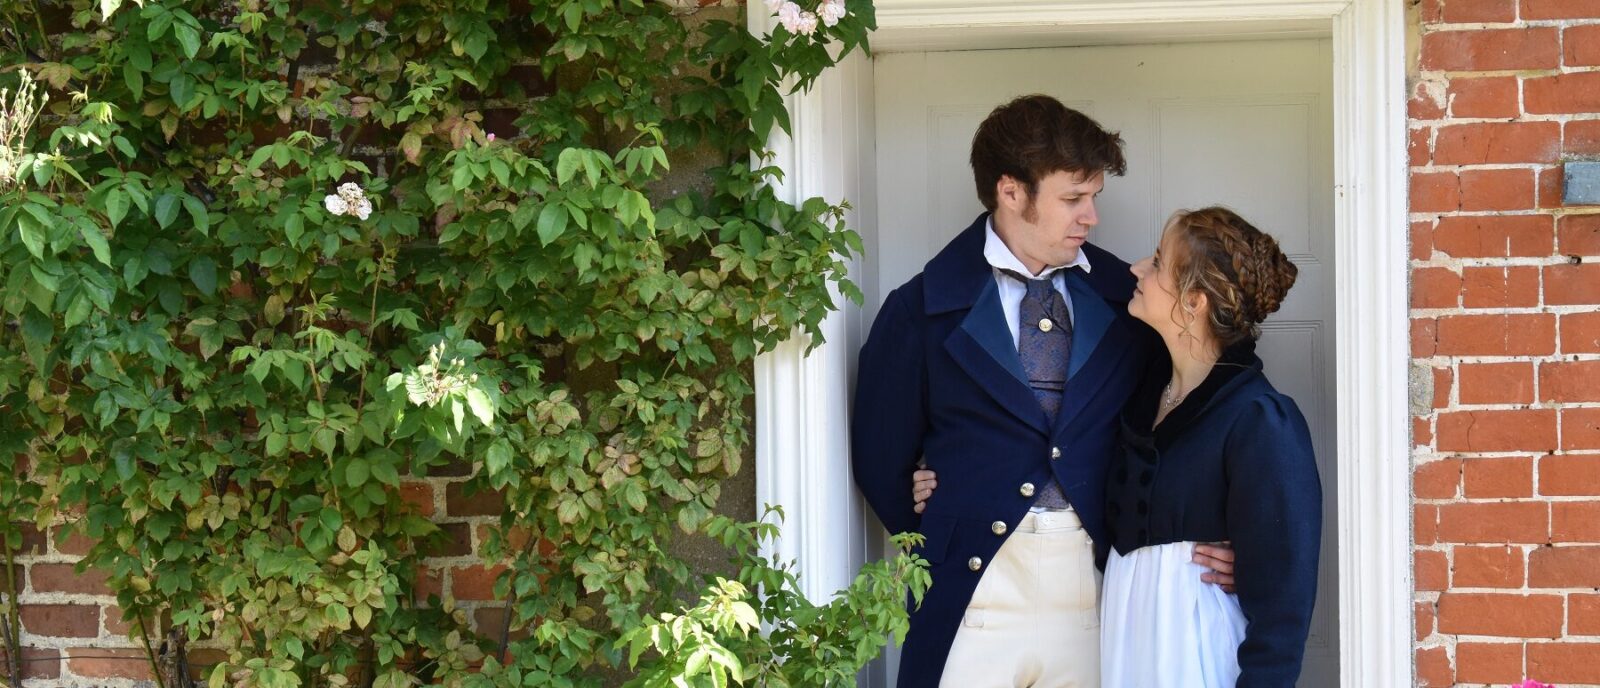 Actors portraying Captain Wentworth and Anne Ellliot from Persuasion standing in the doorway of Jane Austen's House